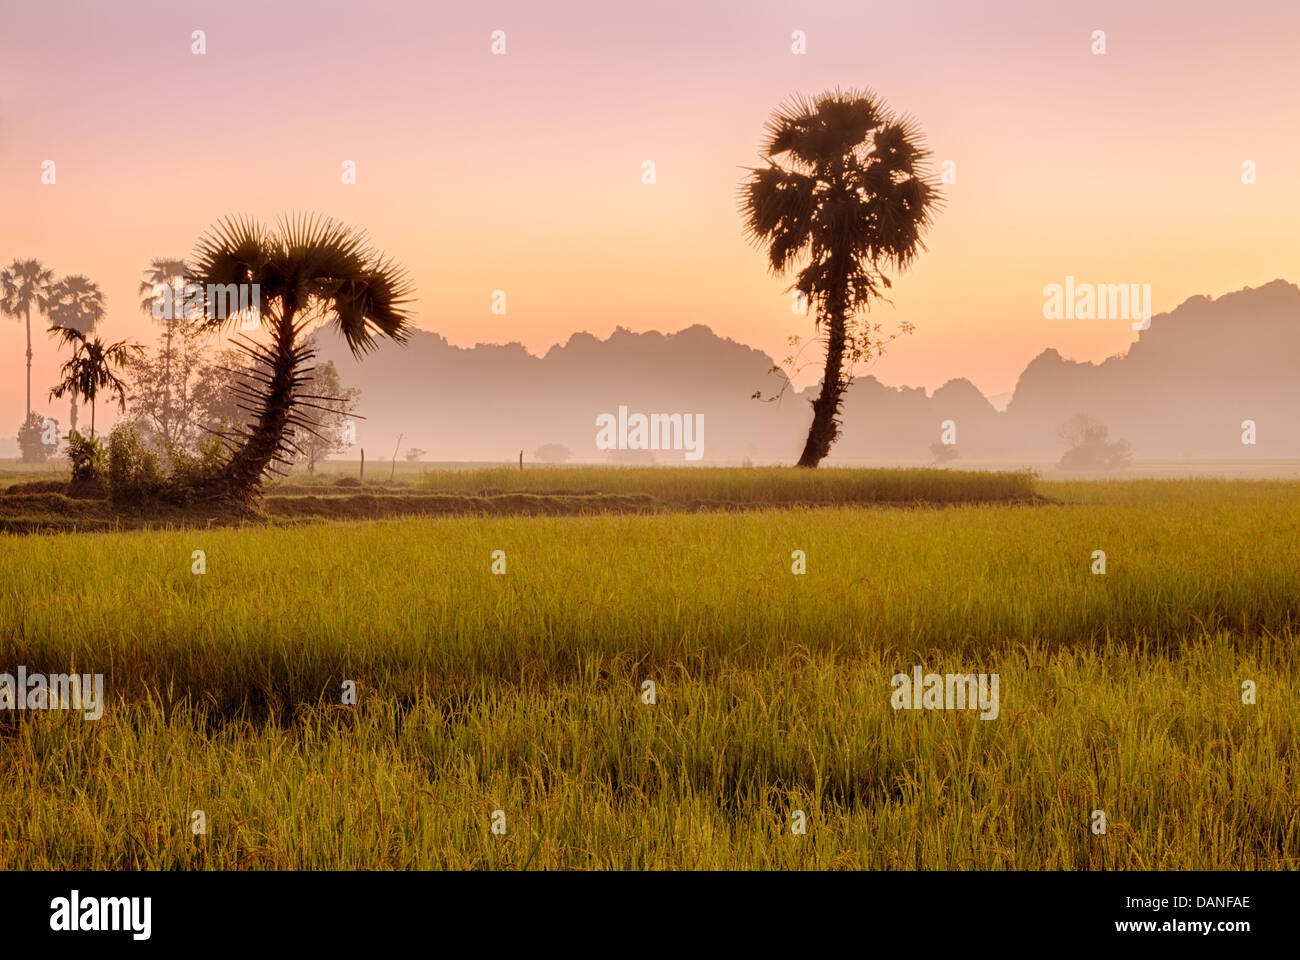 golden rice field of burmese agricultural countryside with karst mountain range silhouette at sunset, Burma Stock Photo